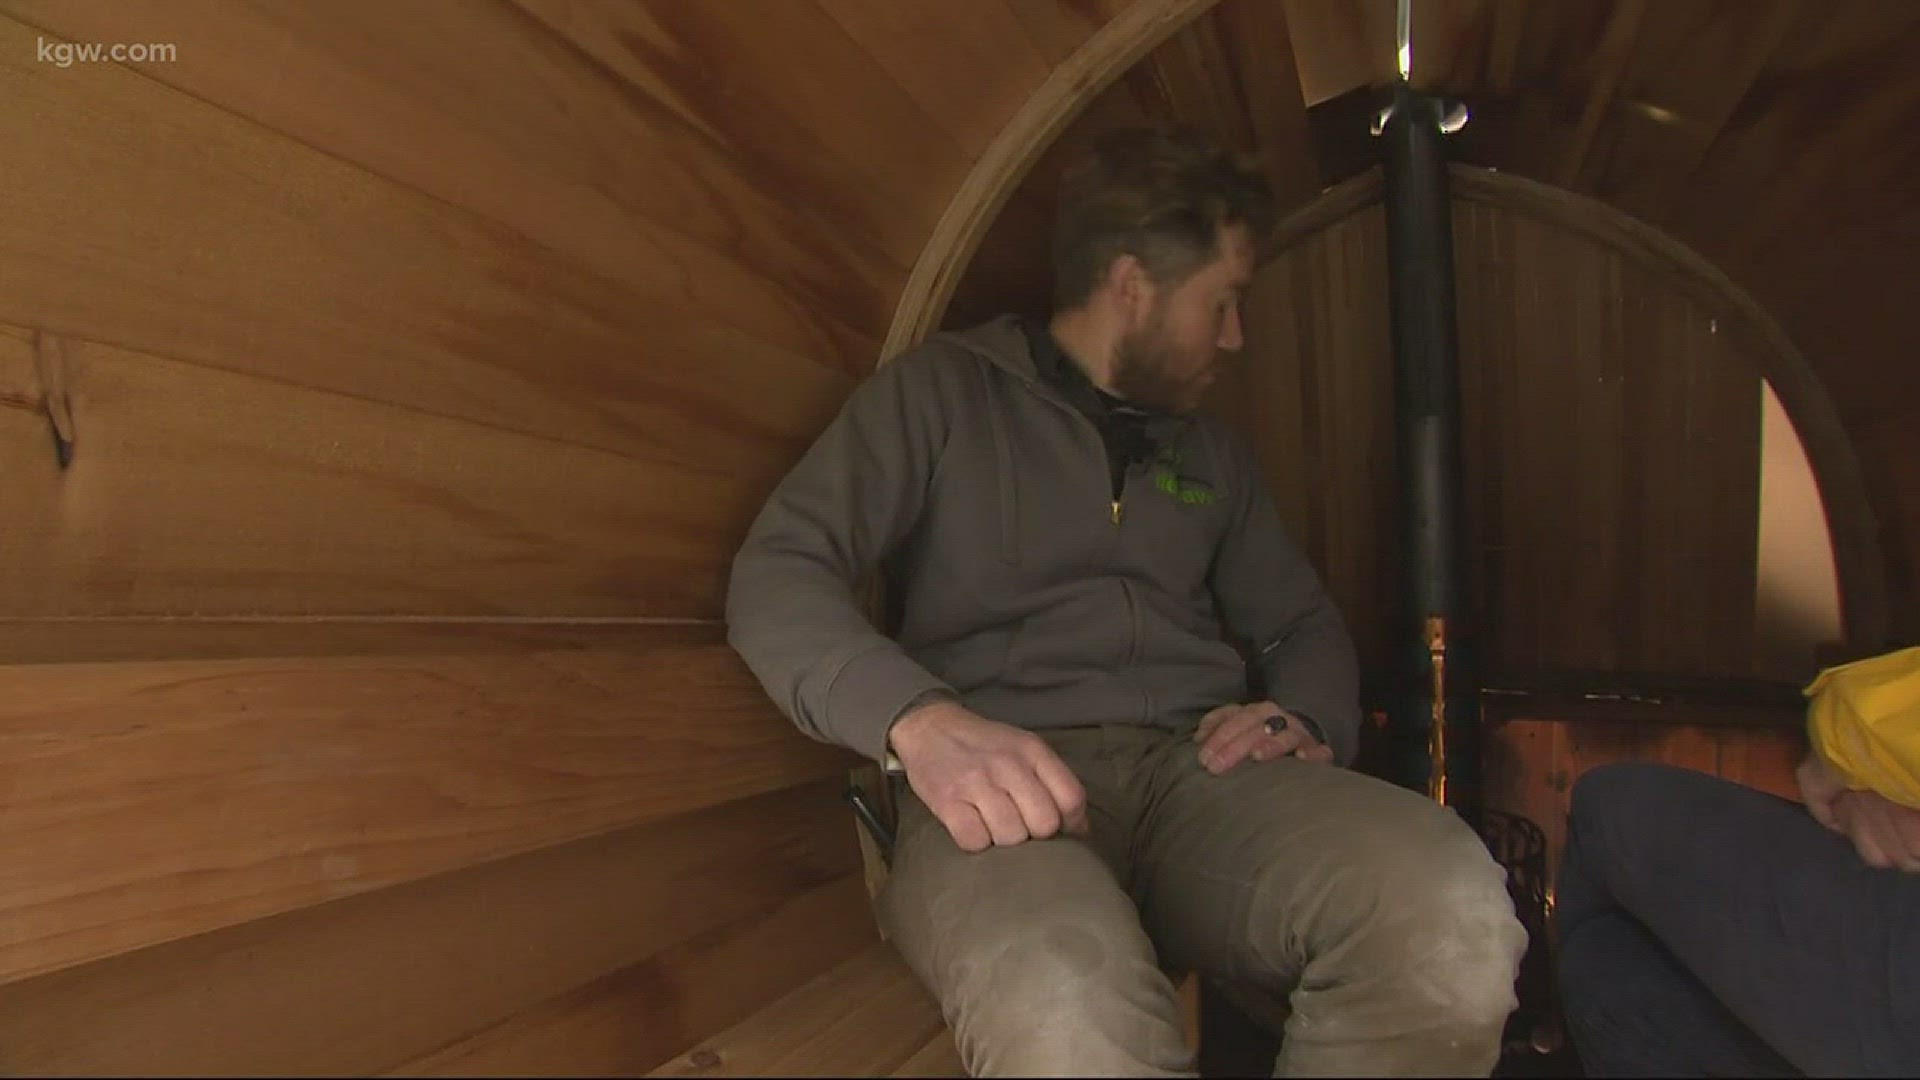 Portland native Simon Lyle's goal is to build tiny homes that can be heated the same way his sauna is, for homeless people.